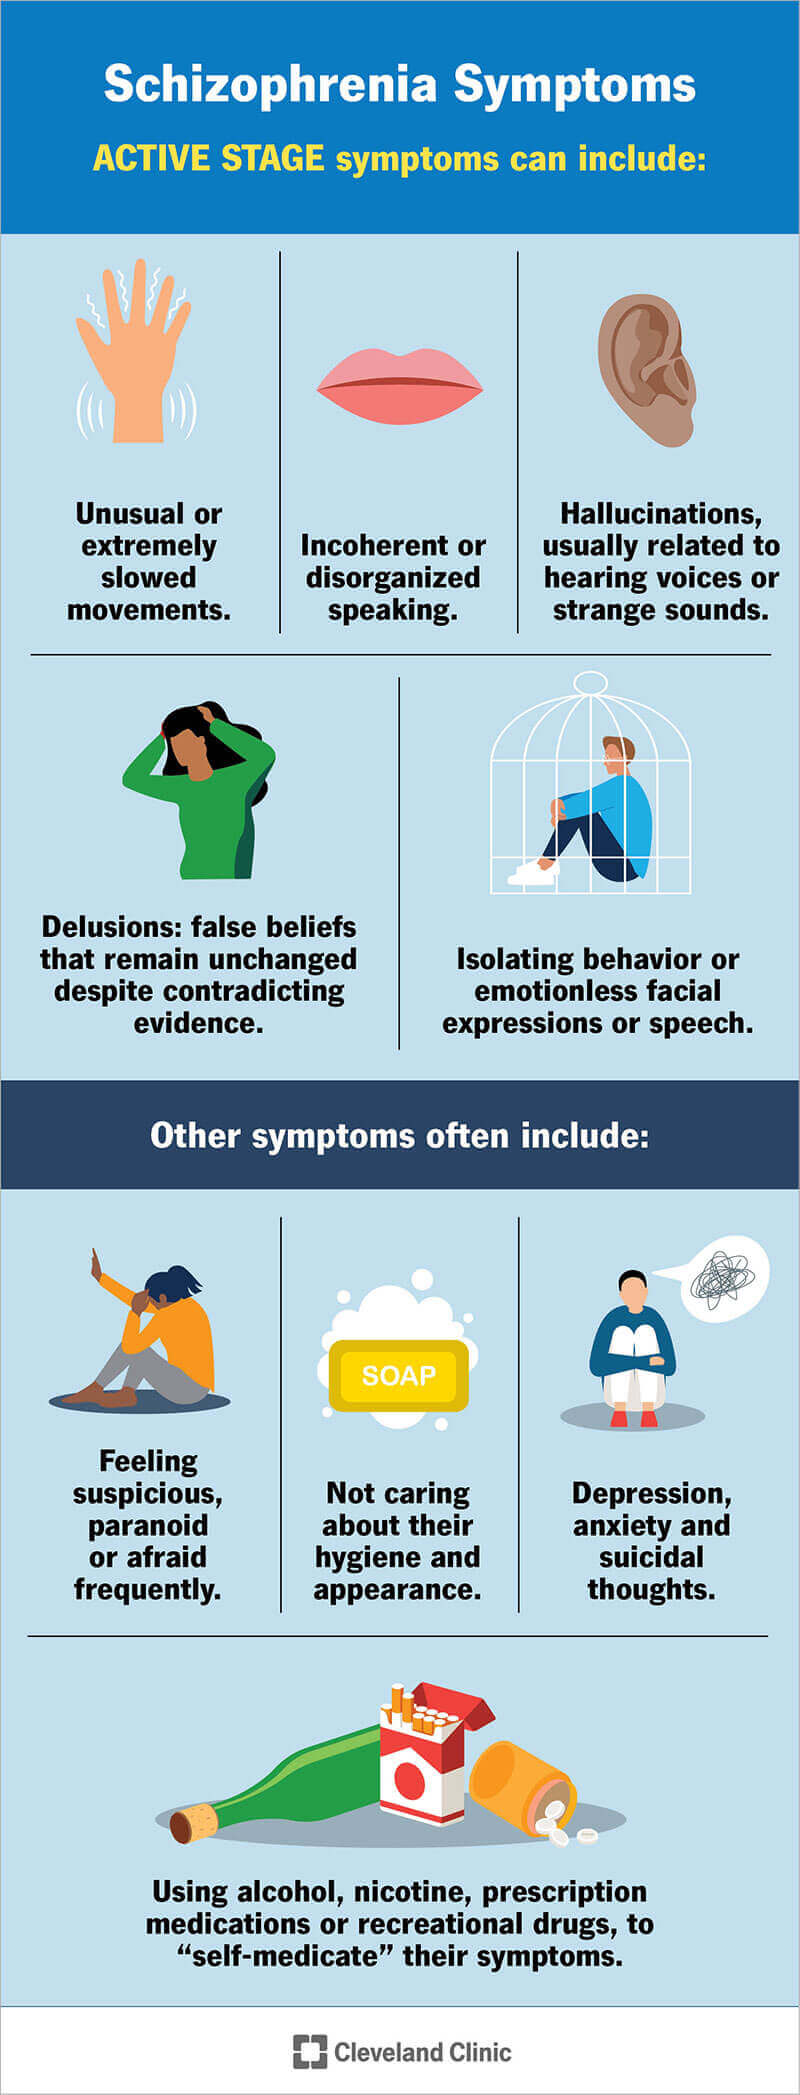 The possible symptoms of schizophrenia, including active stage and other symptoms.